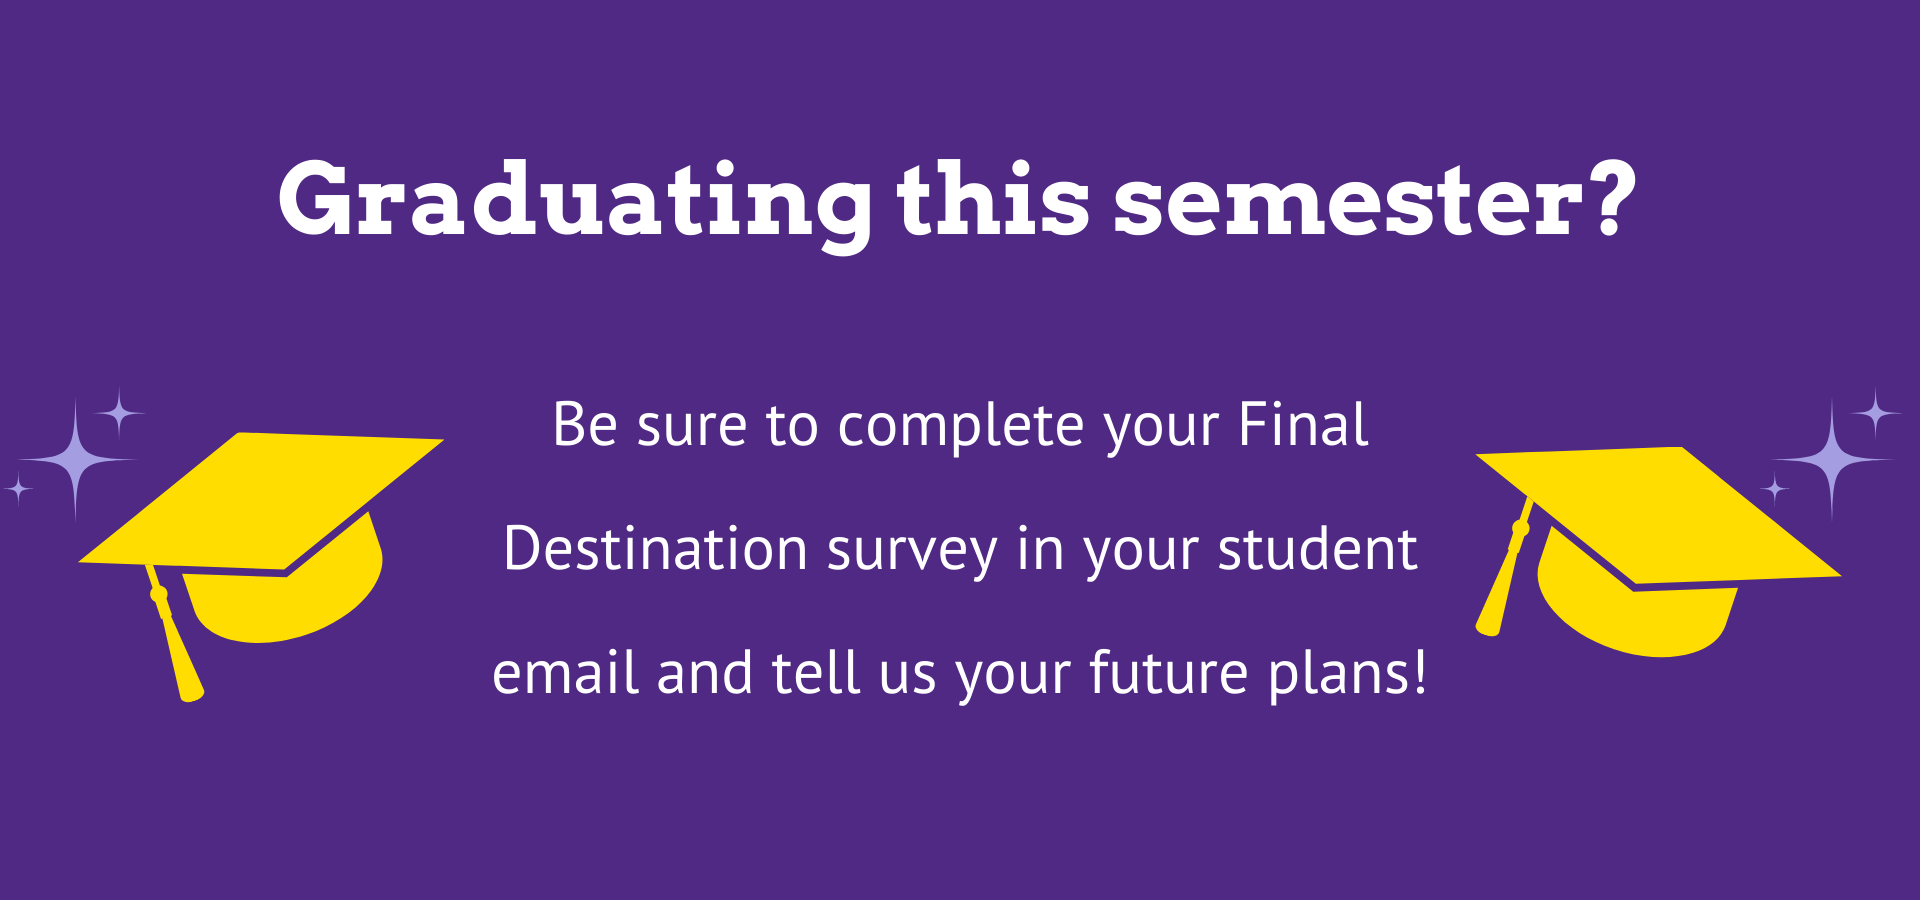 Complete your final destination survey in your student email and tell us your future plans